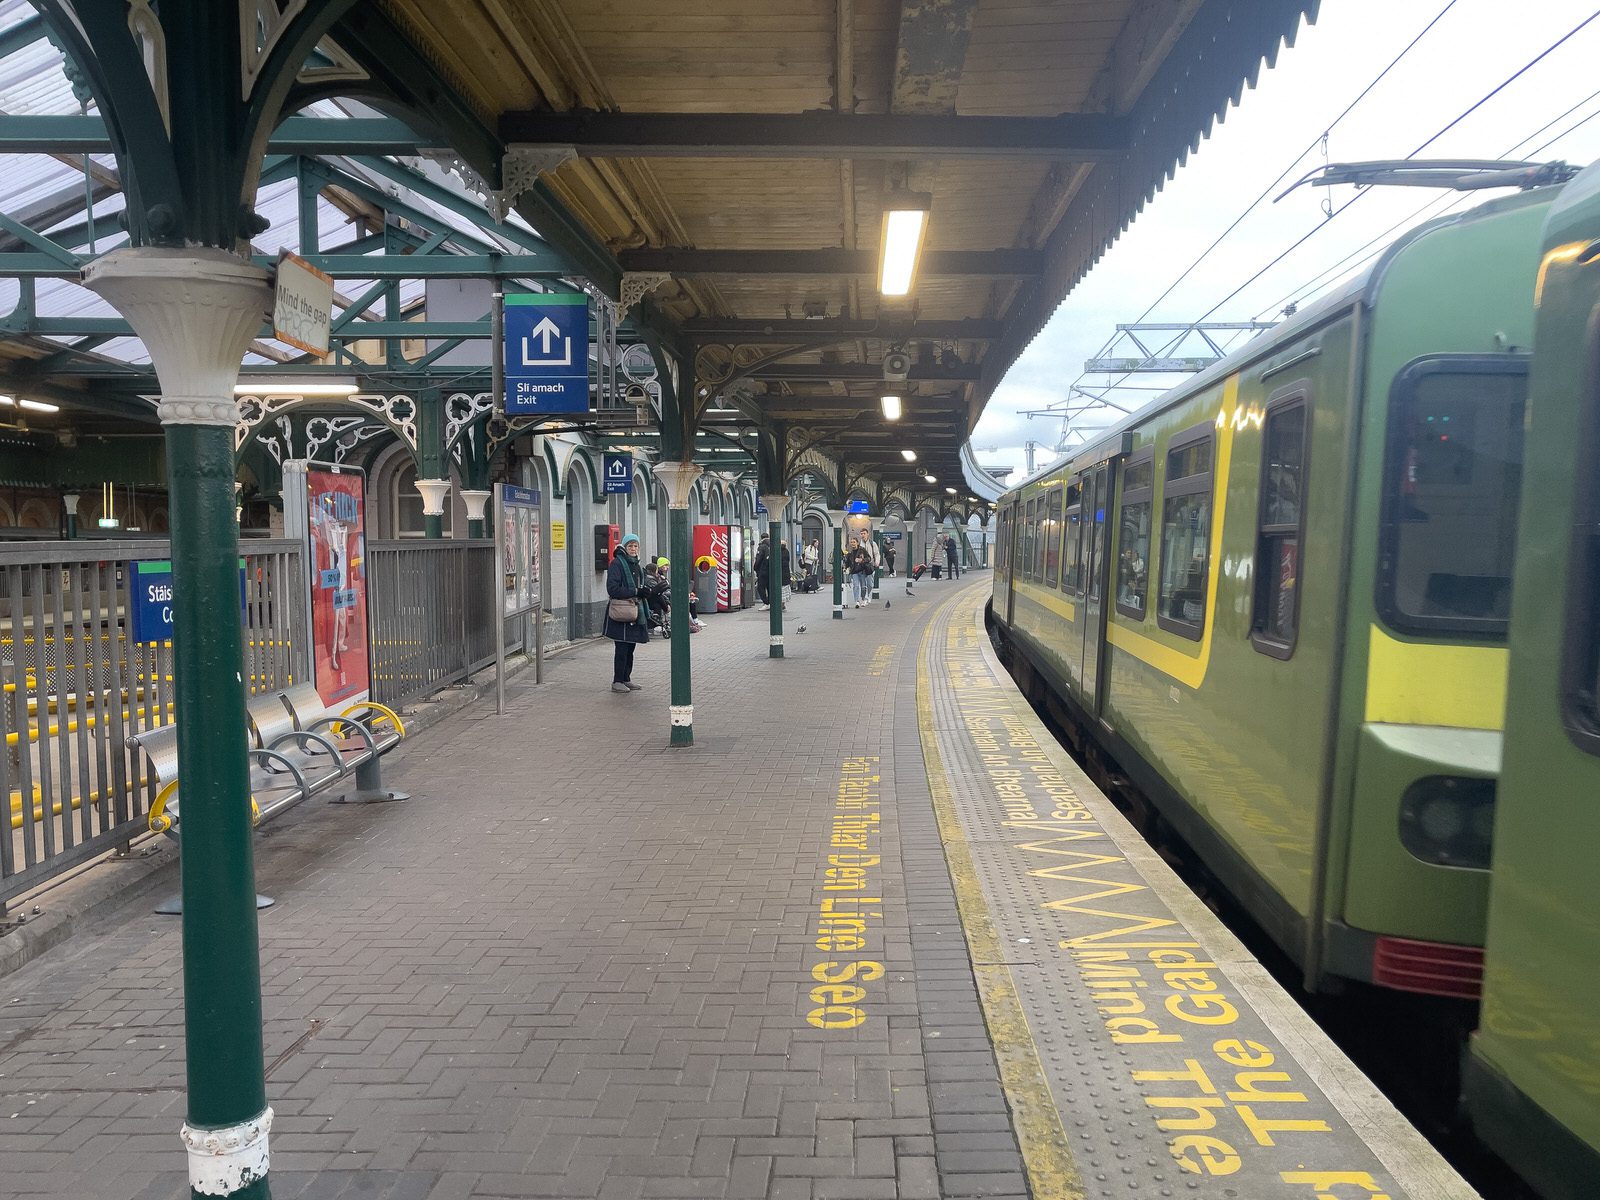 AS THE BUS AND TRAM SERVICES WERE SUSPENDED IN THE CITY CENTRE [I WENT TO CONNOLLY STATION AND TRAVELLED BY DART]-225405-1